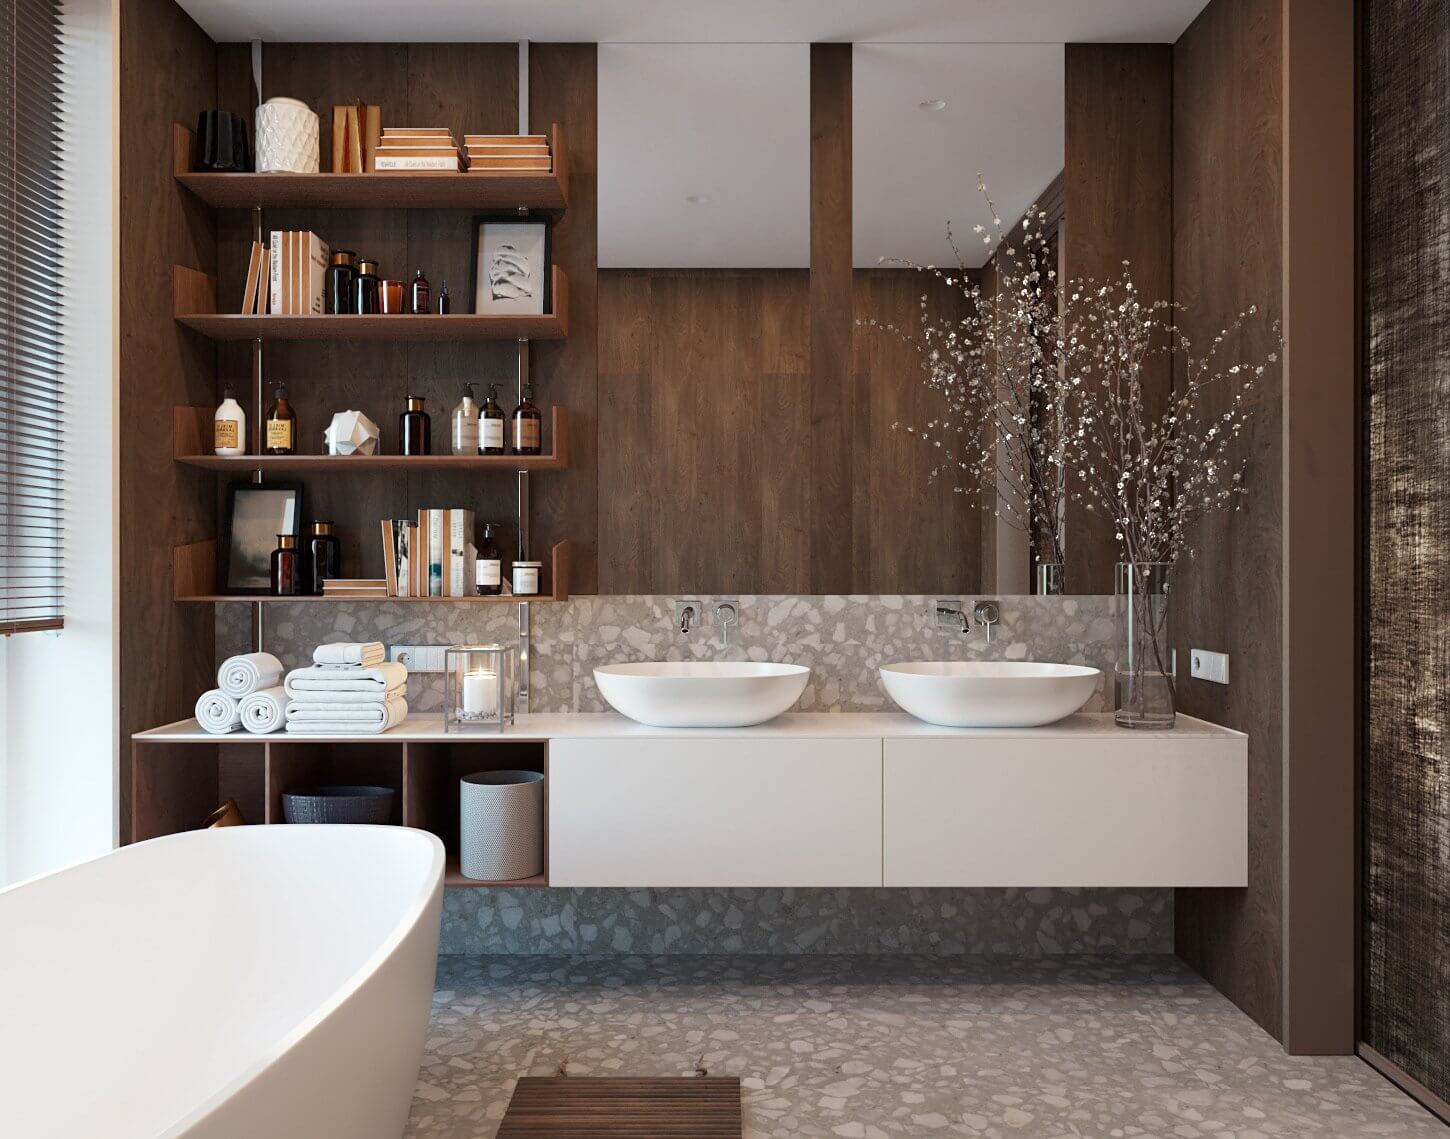 Apartment for a young family bathroom - cgi visualization